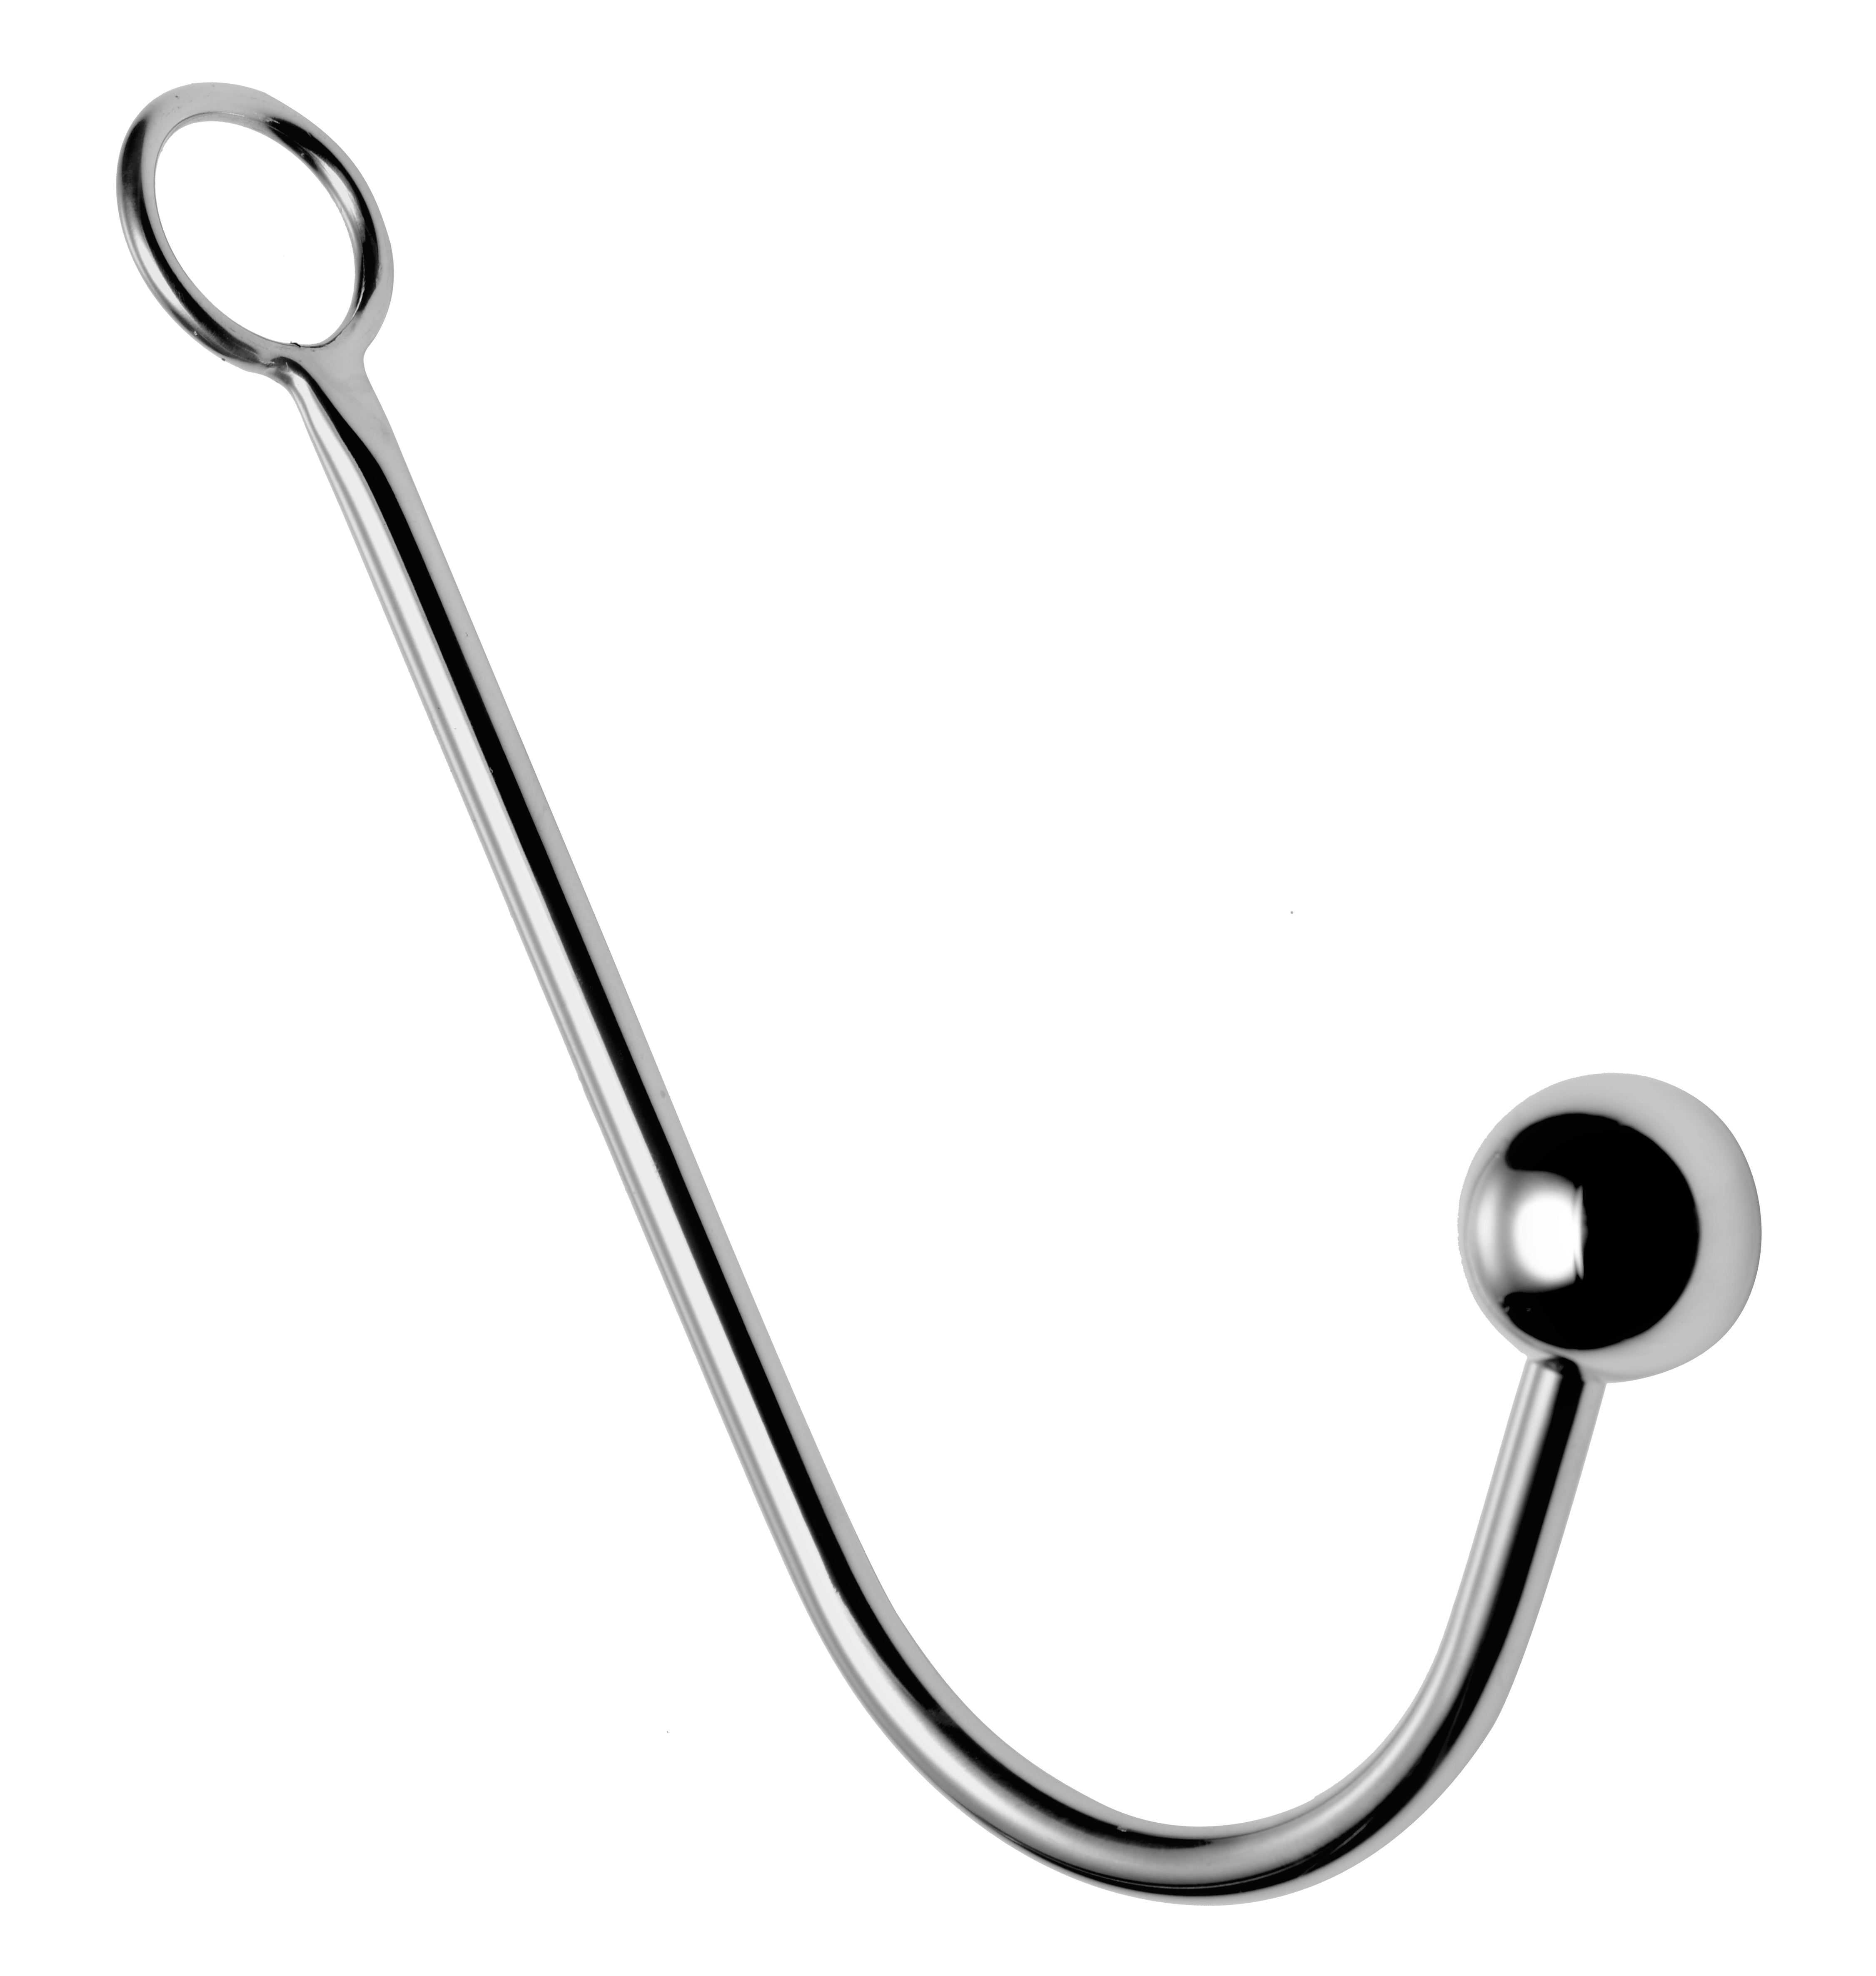 Hooked Stainless Steel Anal Hook-2